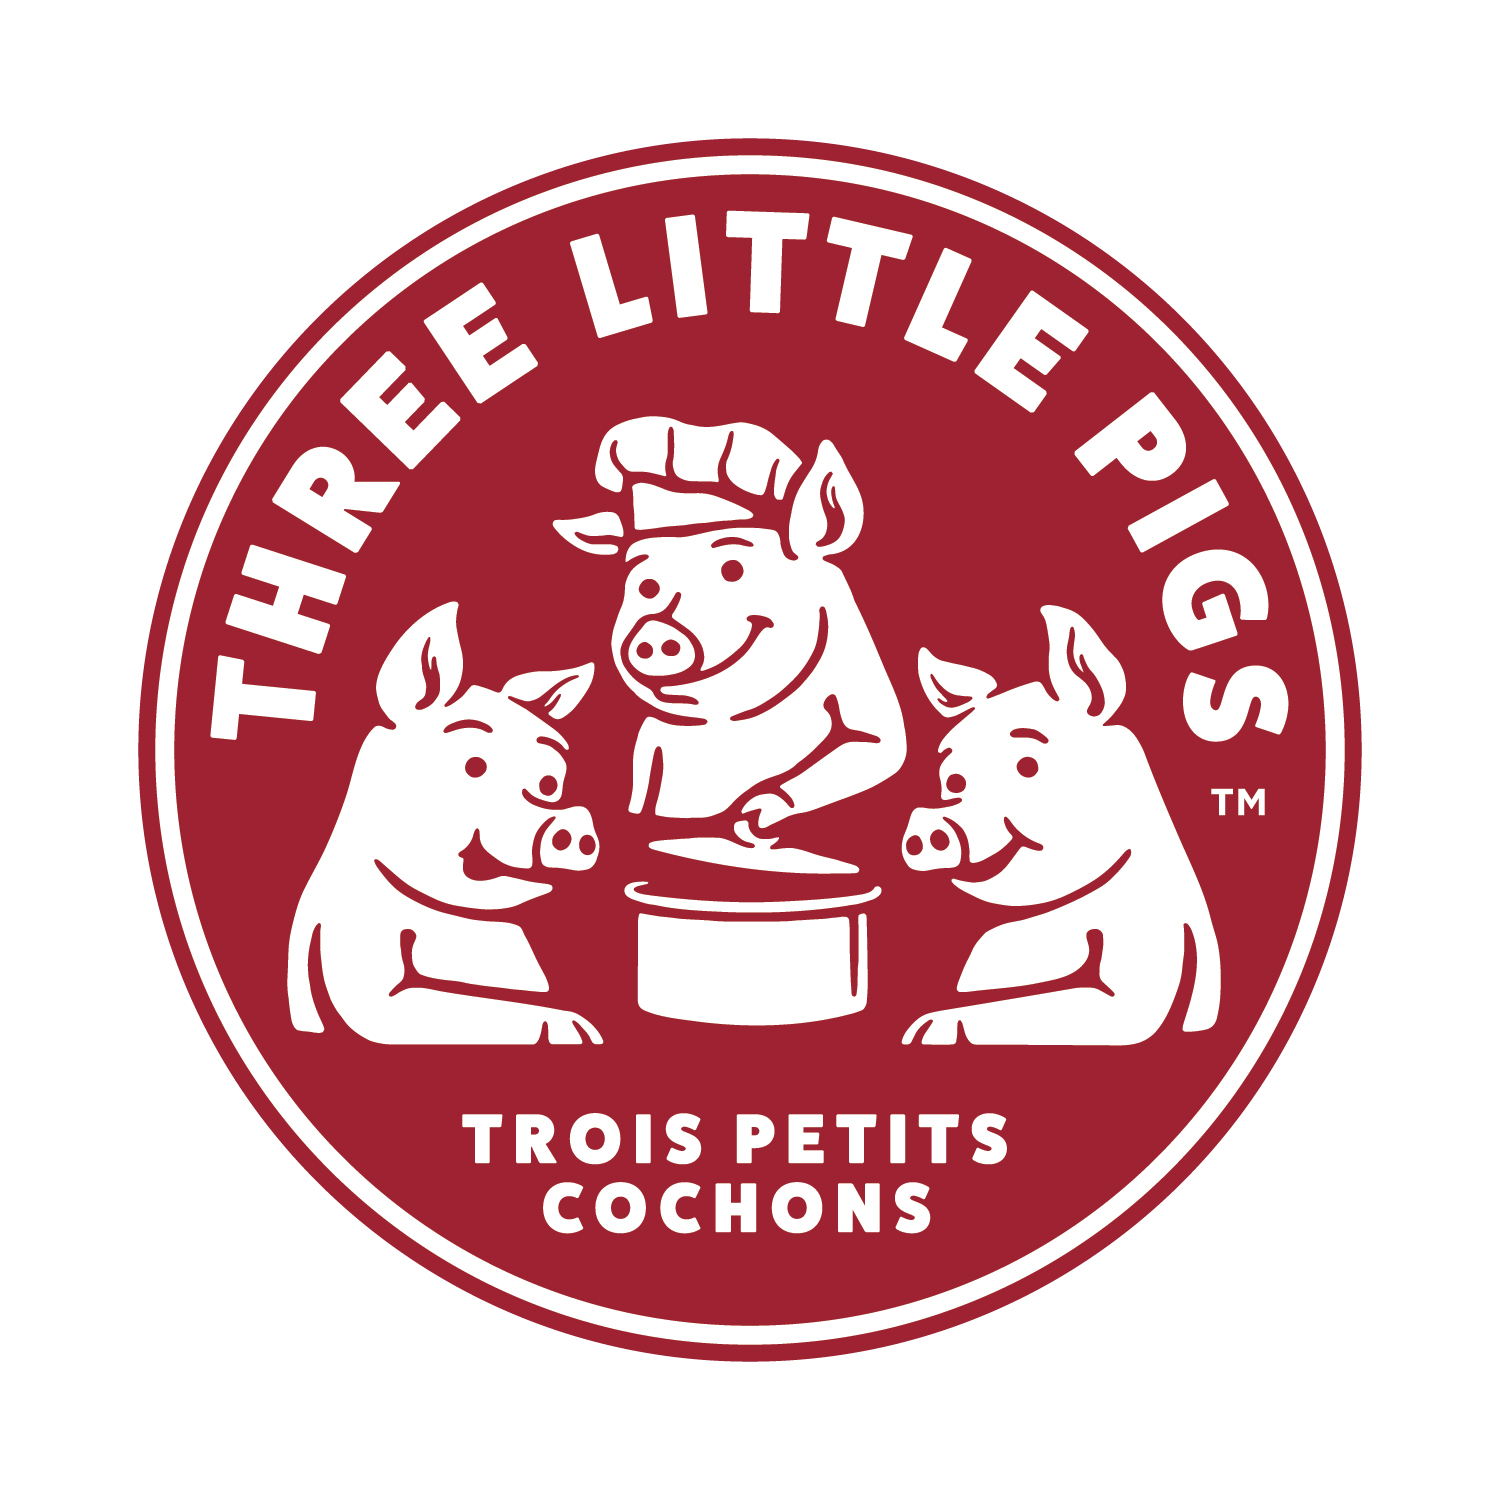 Les Trois Petits Cochons, Three Little Pigs in French